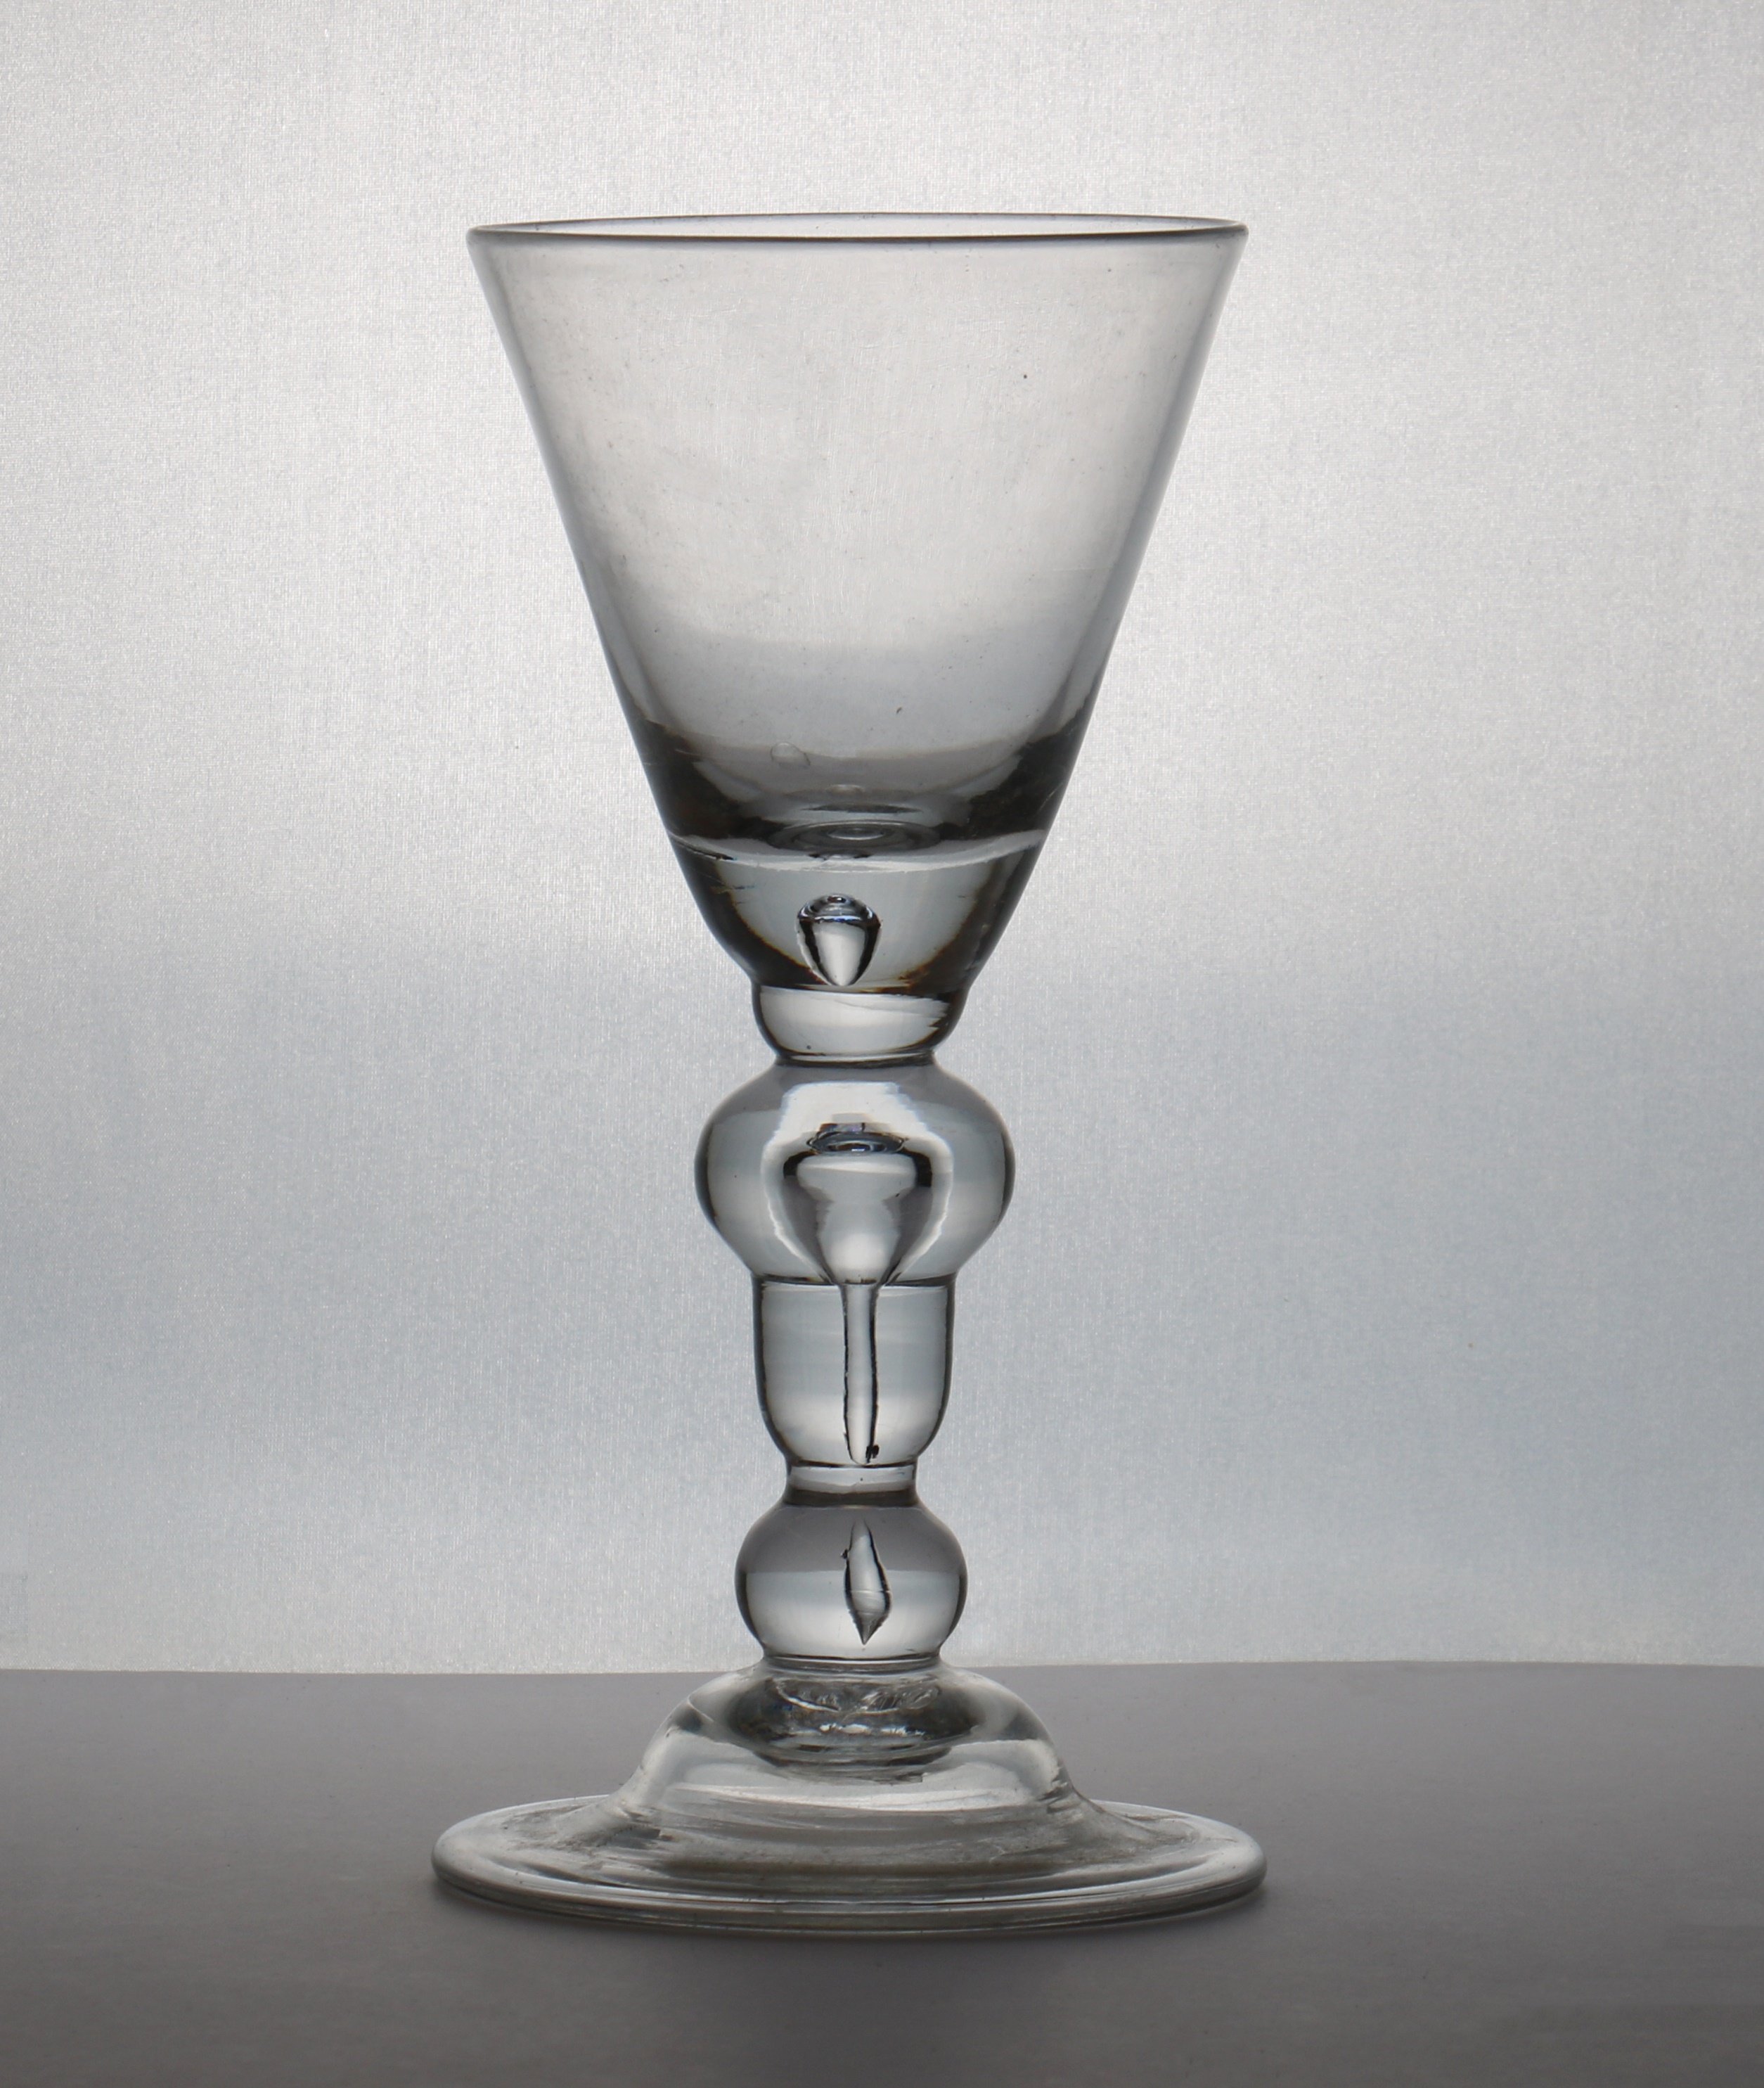 A heavy baluster wine glass goblet (£1,500-2,500)